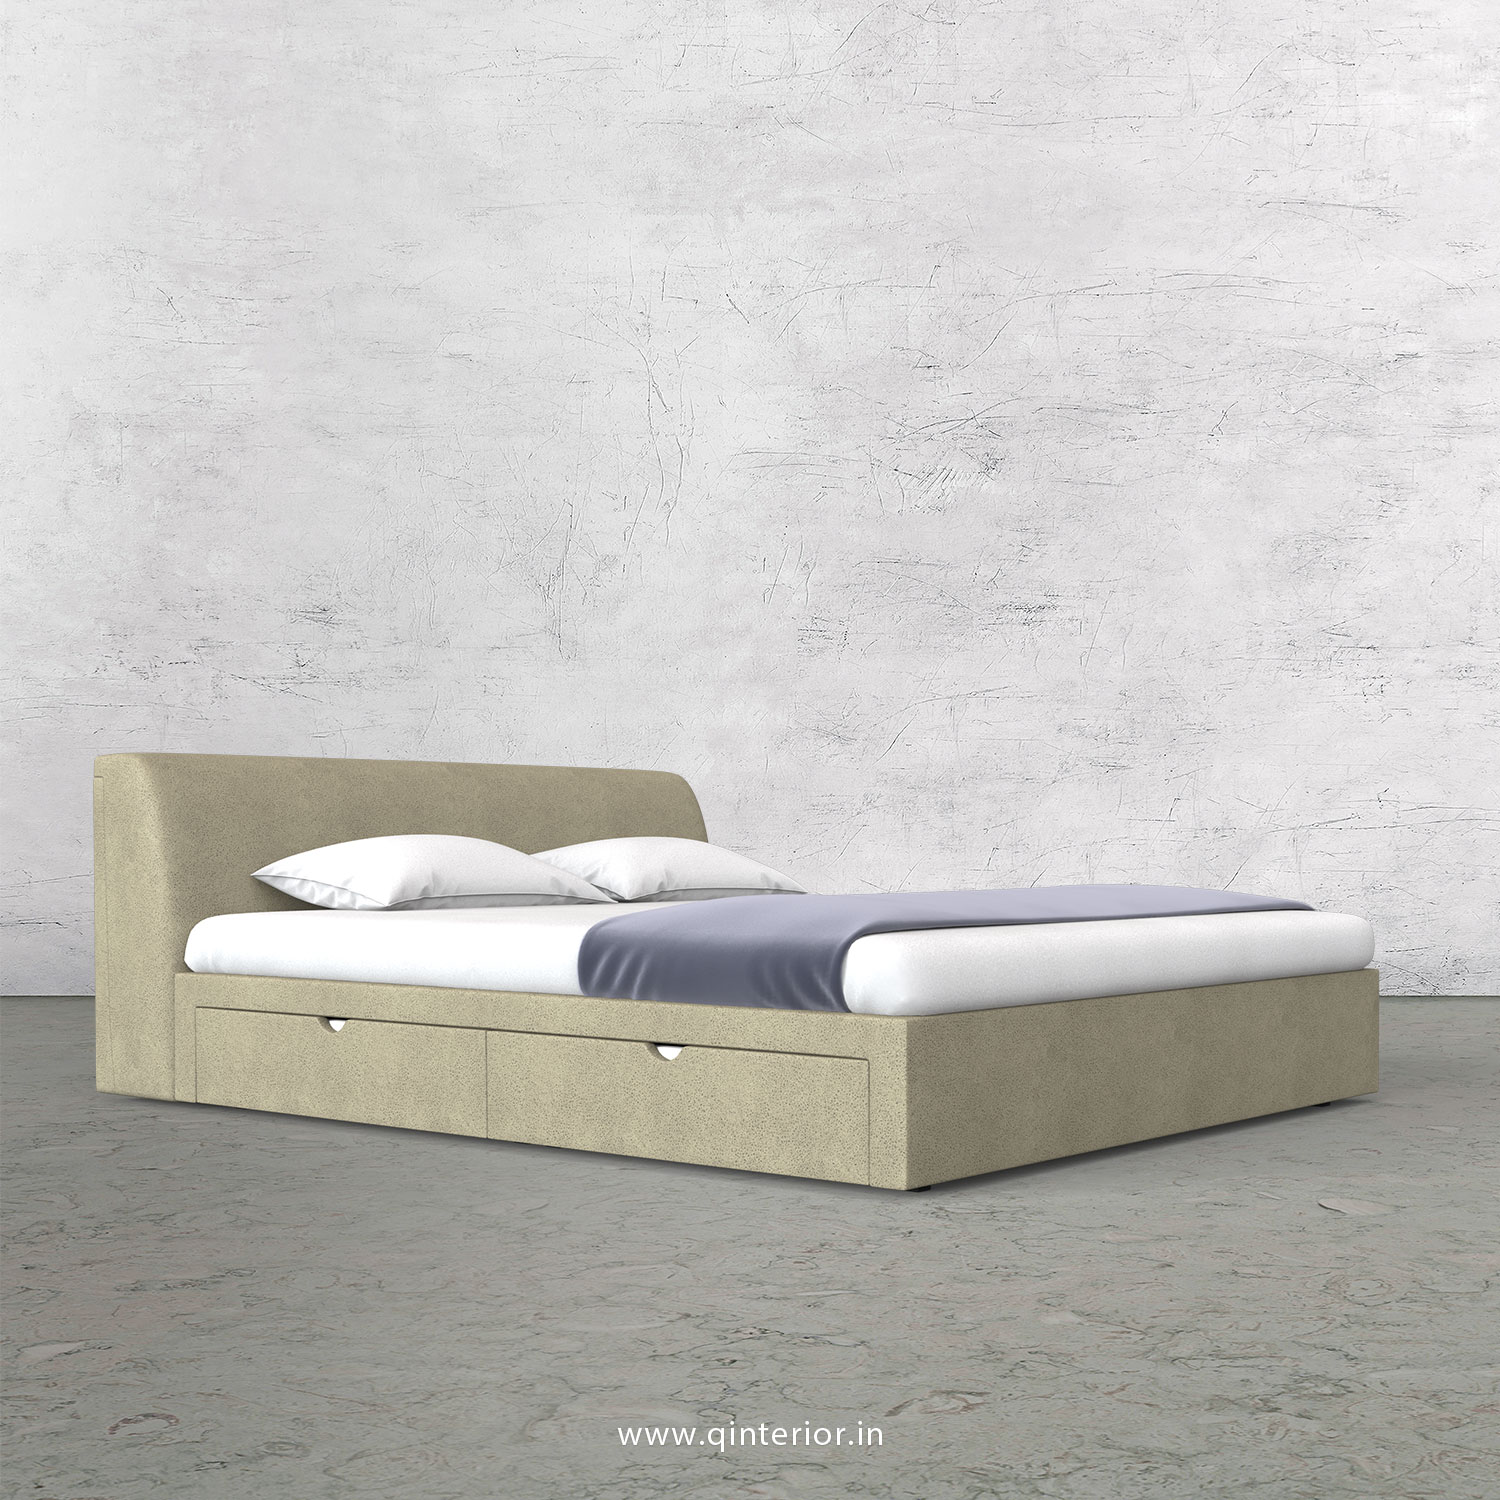 Luxura Queen Storage Bed in Fab Leather Fabric - QBD007 FL10